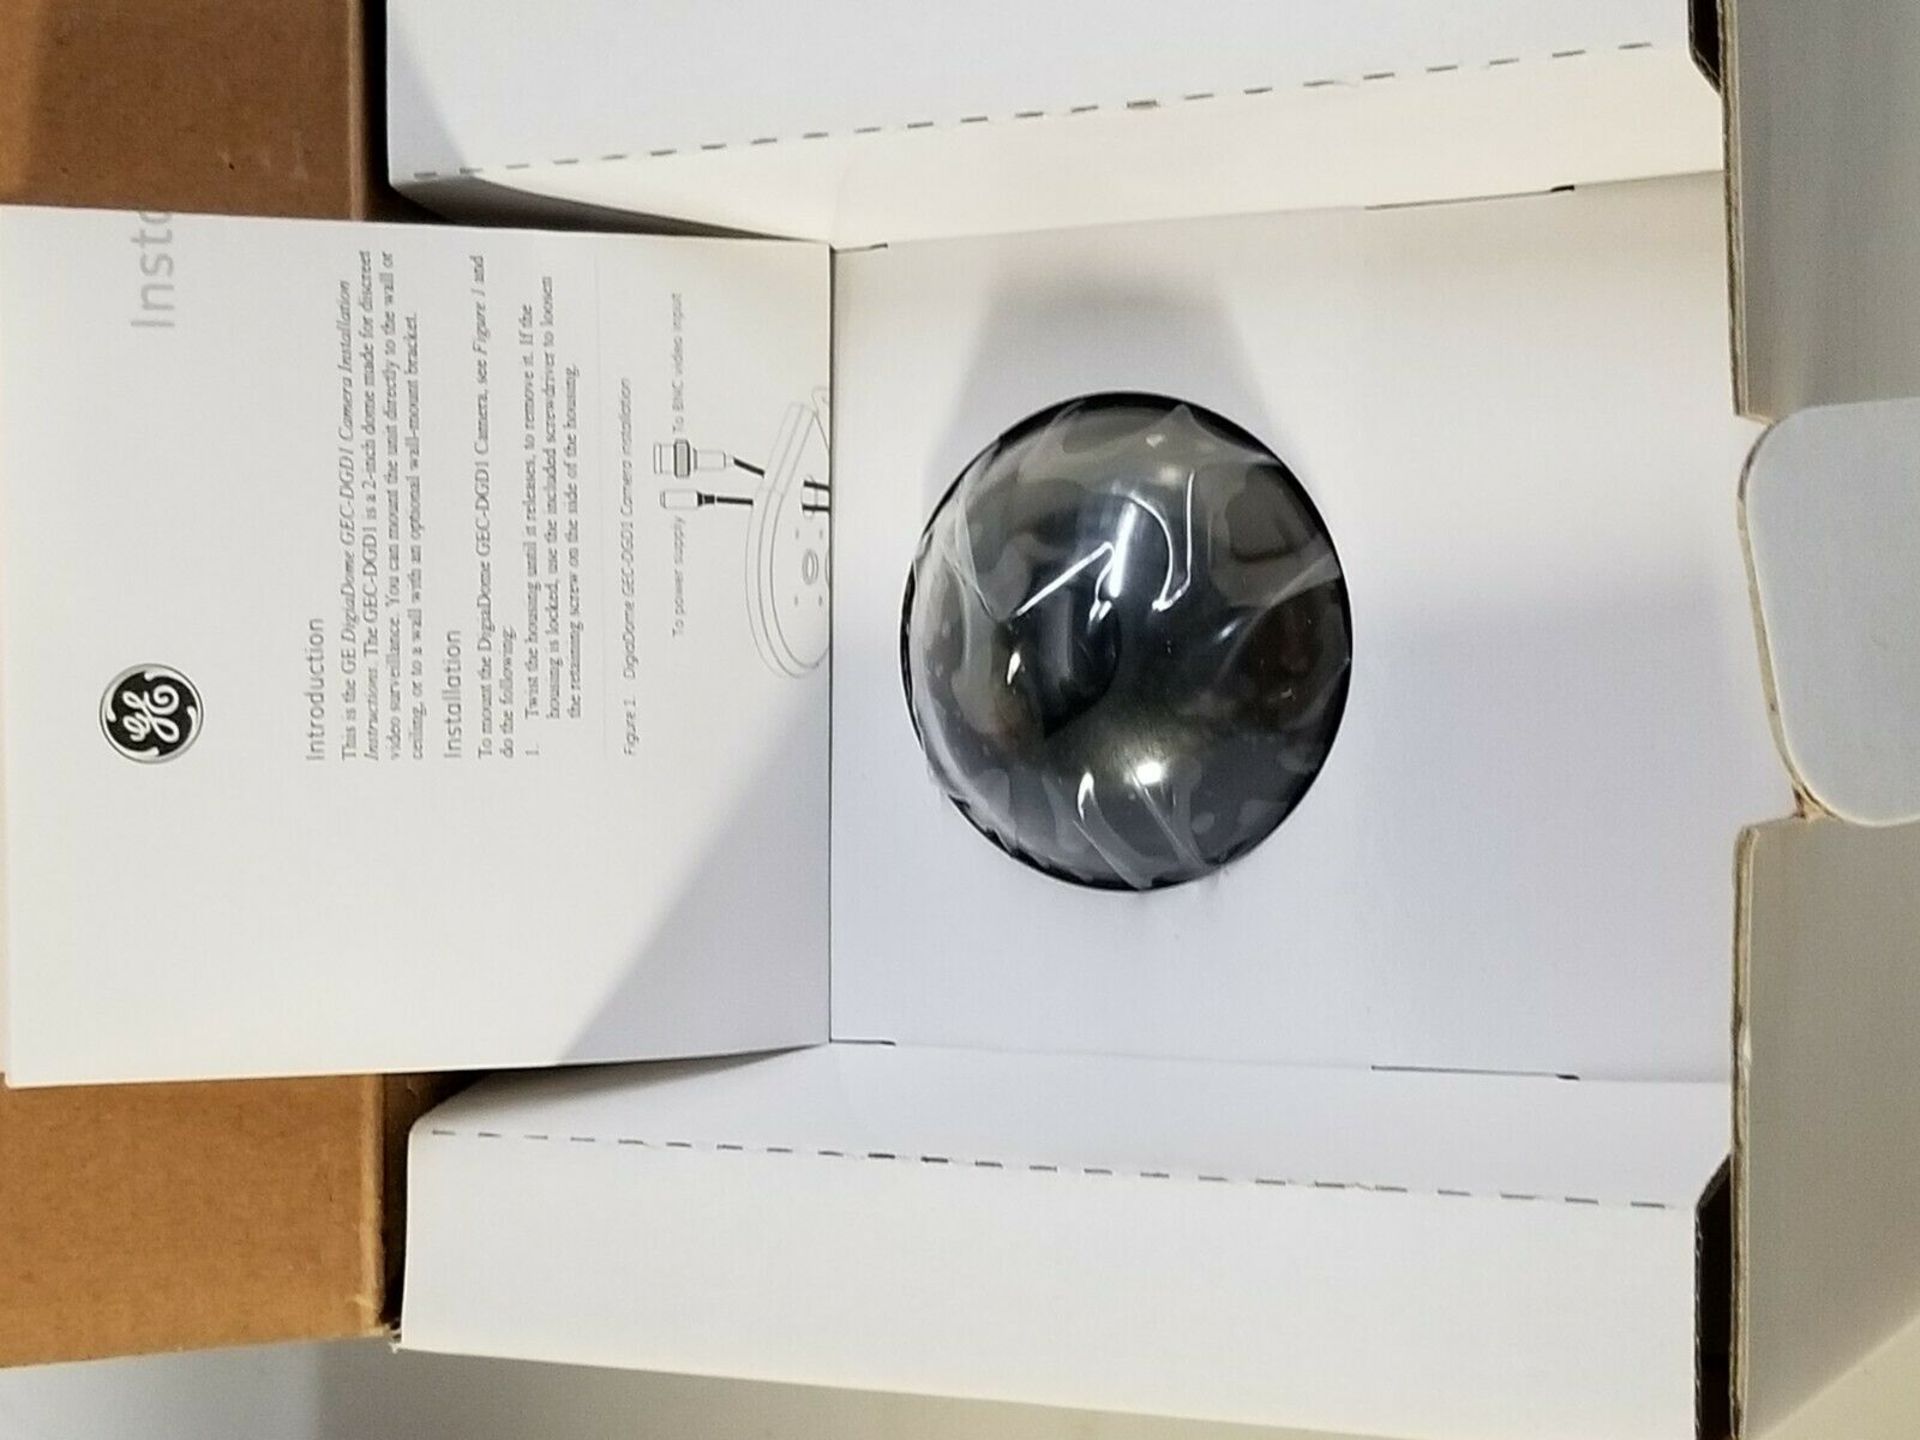 NEW GE COLOR DOME SECURITY CAMERA - Image 3 of 7